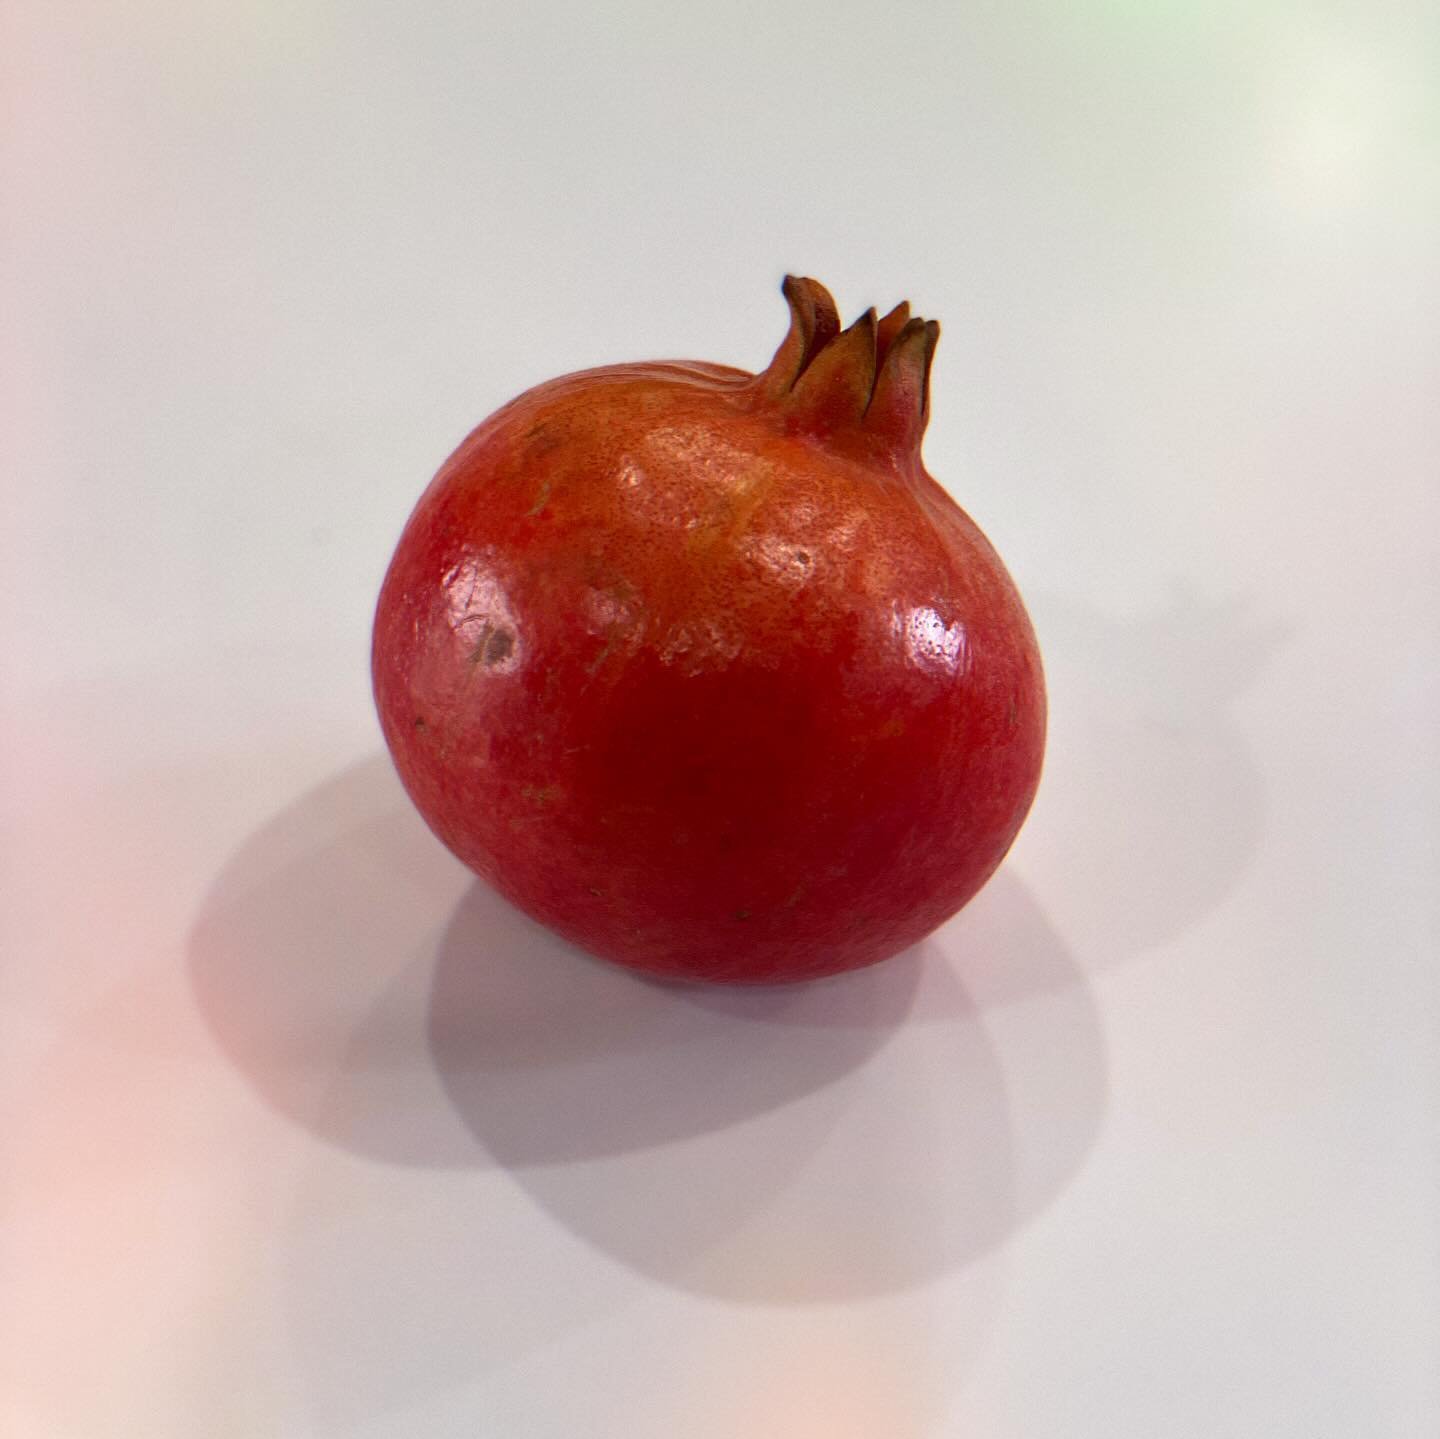 Everything tells a story. This is a pomegranate, I know you know that&hellip; or maybe you don&rsquo;t? The story of this pomegranate starts with a confession. 
I was recently on a lovely Storytelling retreat @emersoncollege with  The School of Story